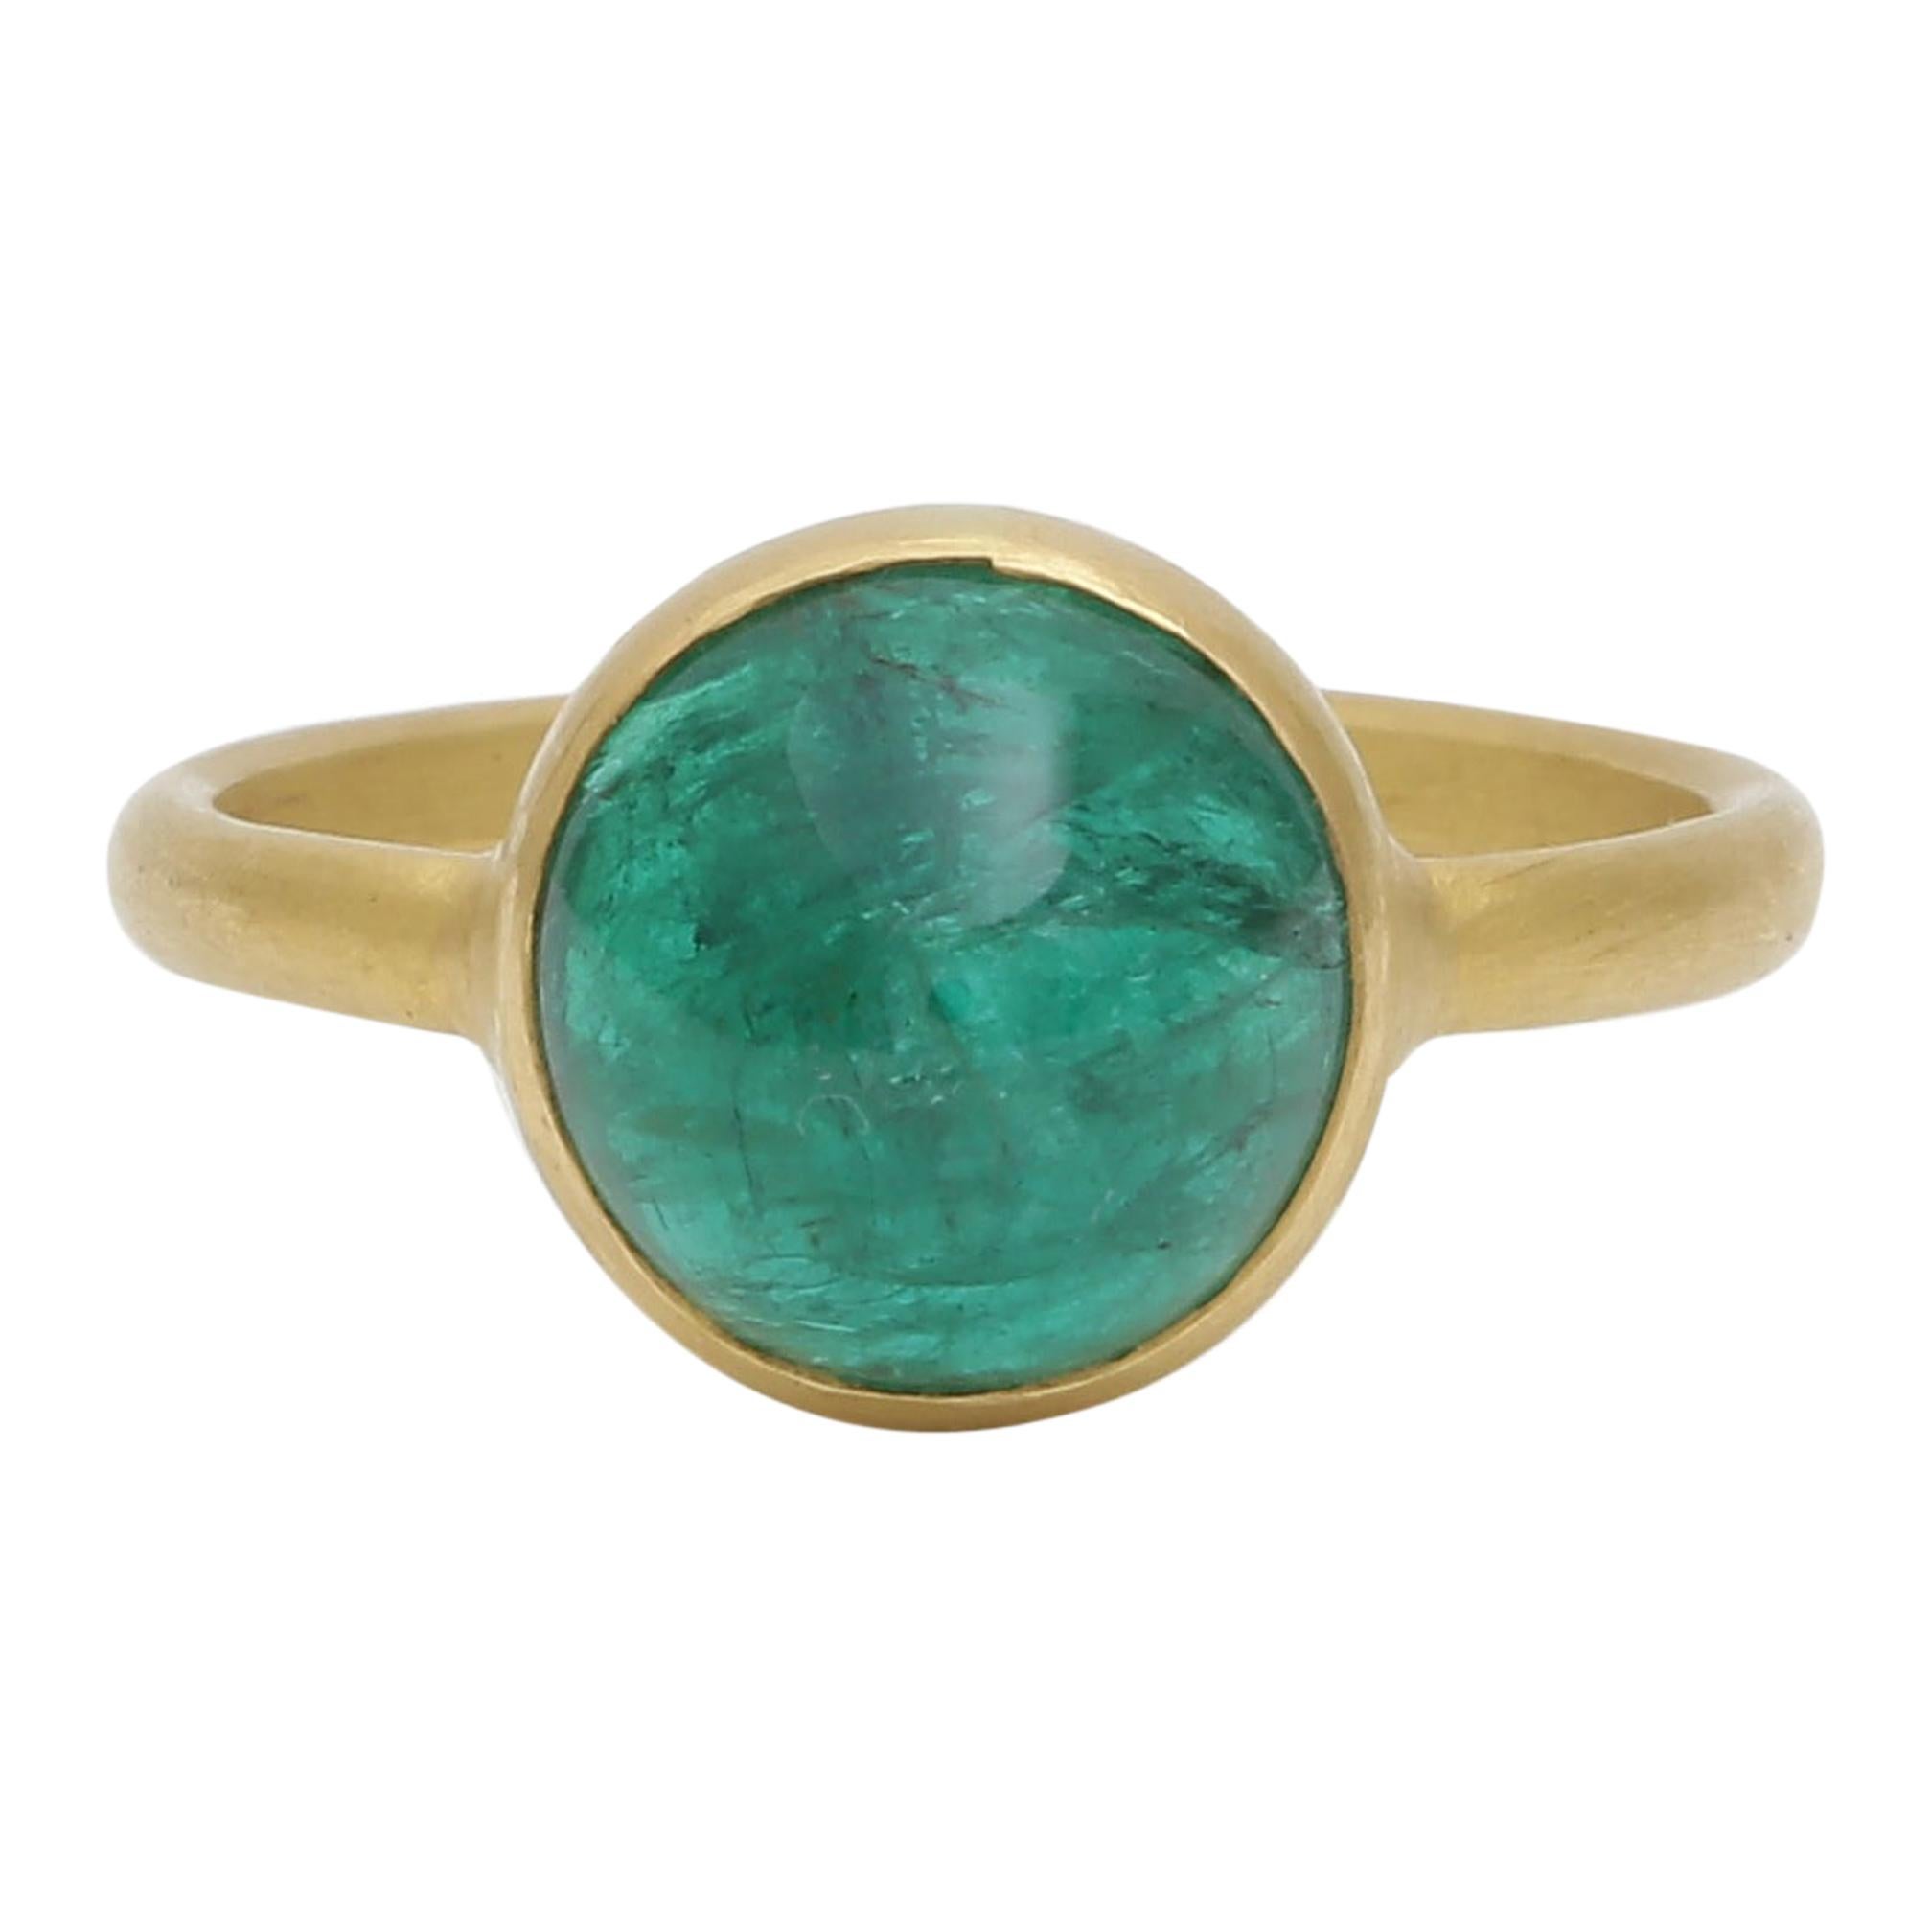 Zambian Emerald Cabochon Handcrafted Ring in 18 Karat Yellow Gold